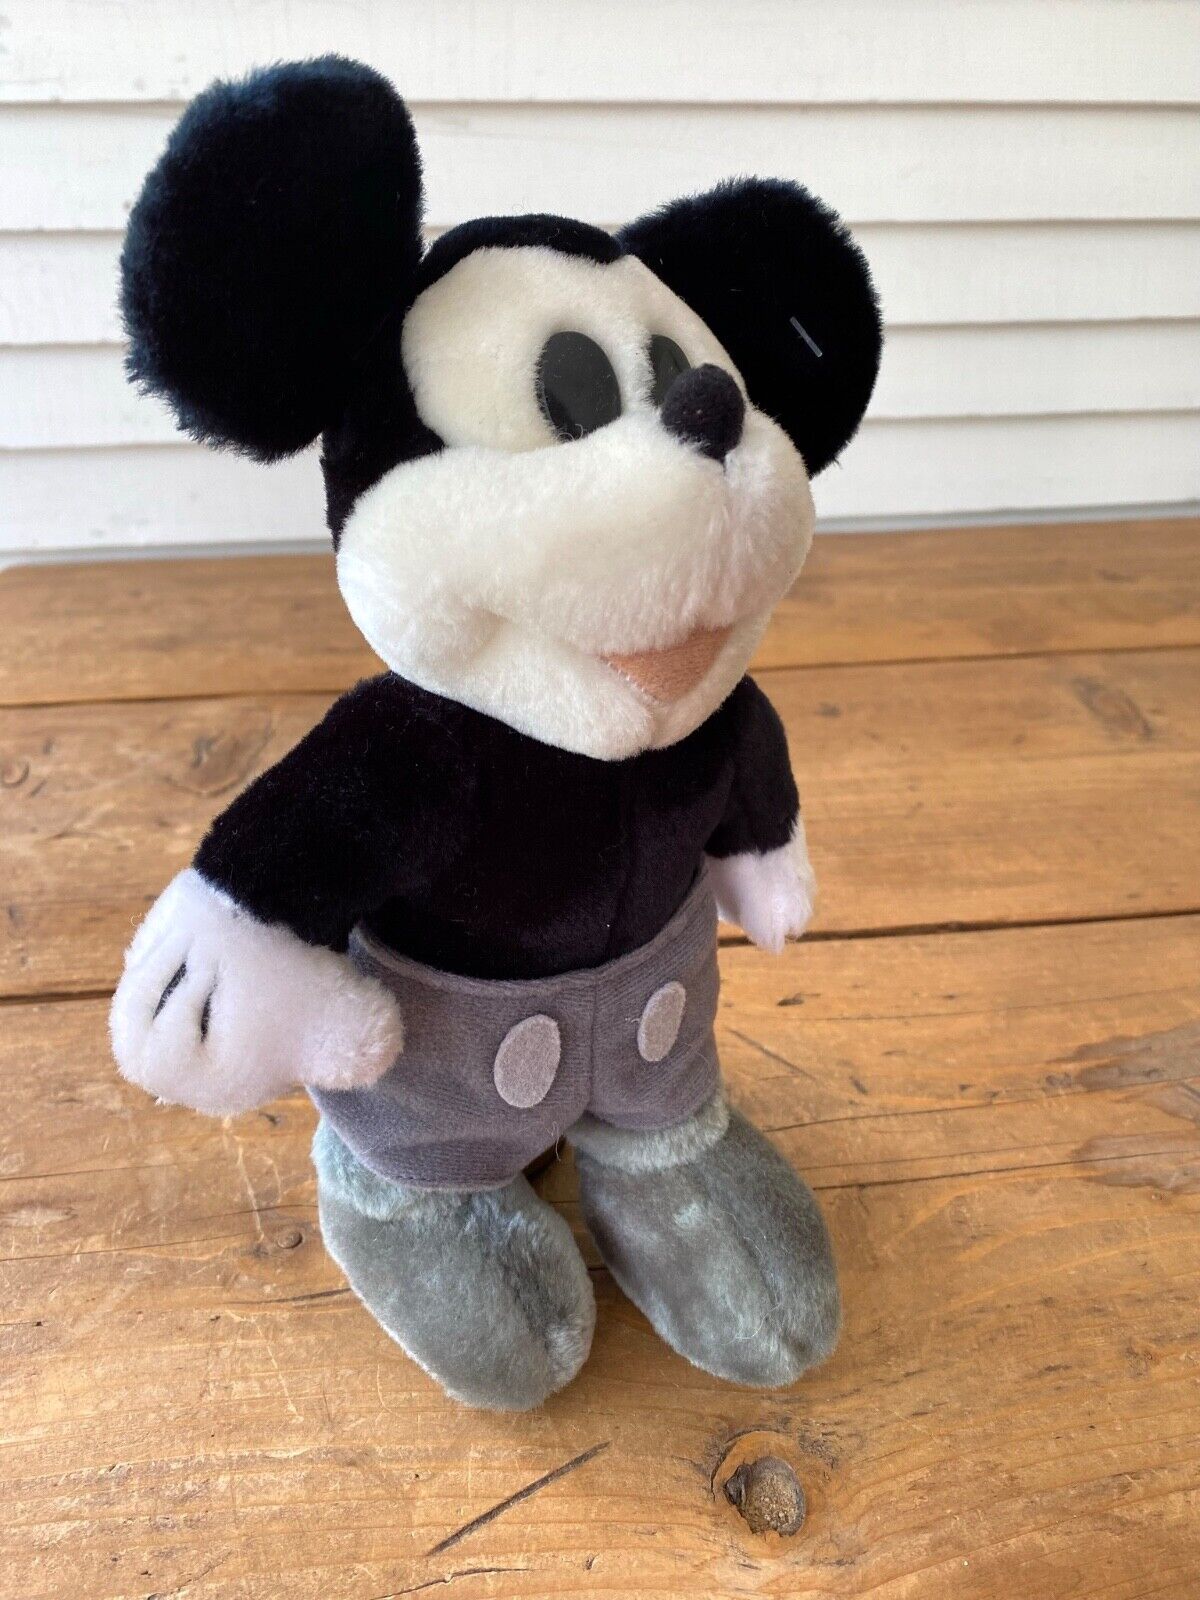 9” VINTAGE Old Time BLACK & WHITE Mickey Mouse PLUSH Doll Toy JAPAN Import RARE